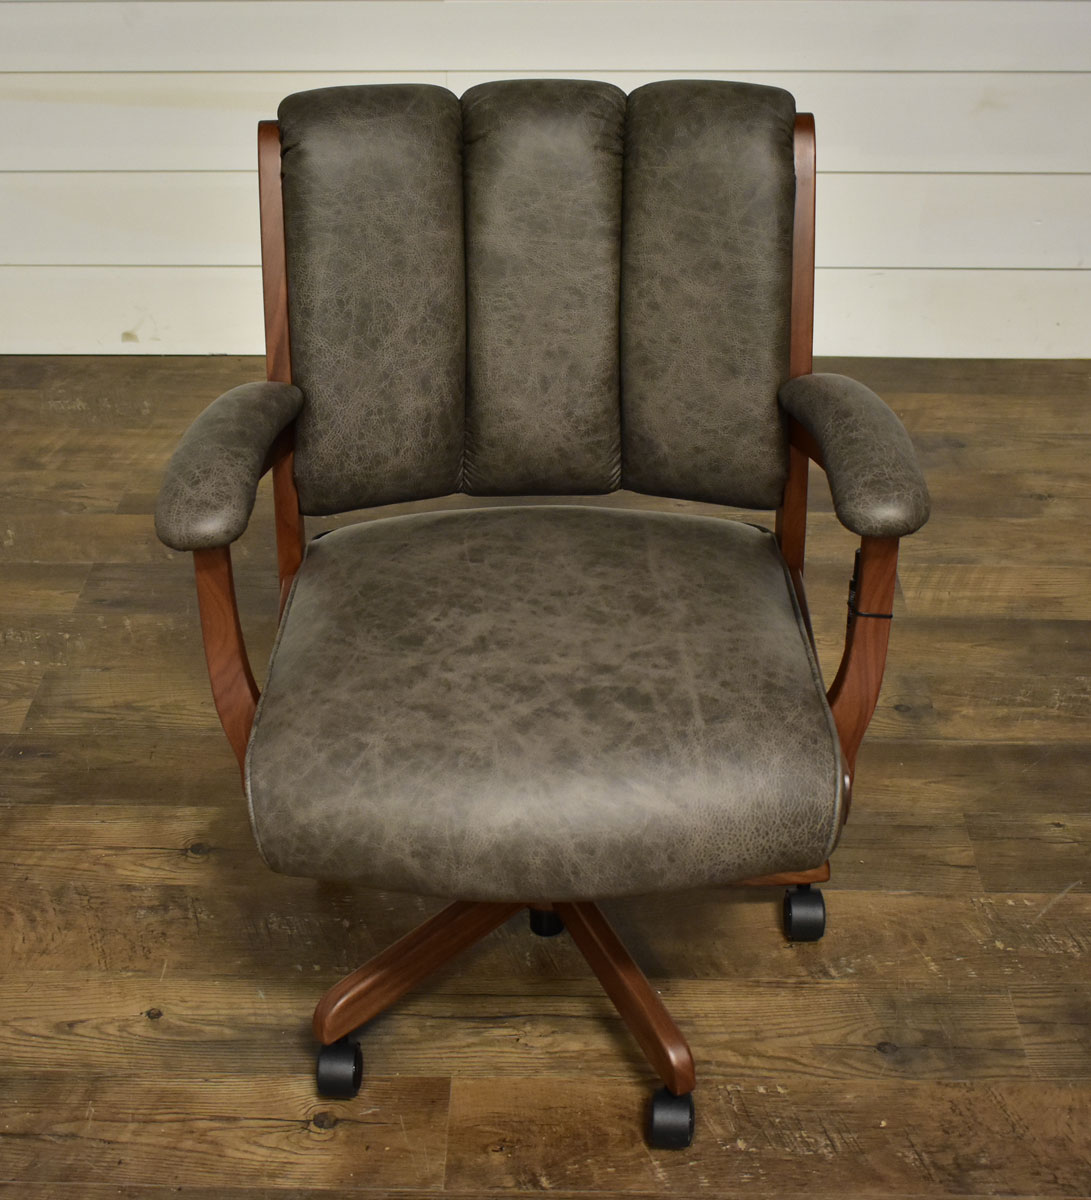 Edelweiss Arm Desk Chair in Saloon Gray Leather